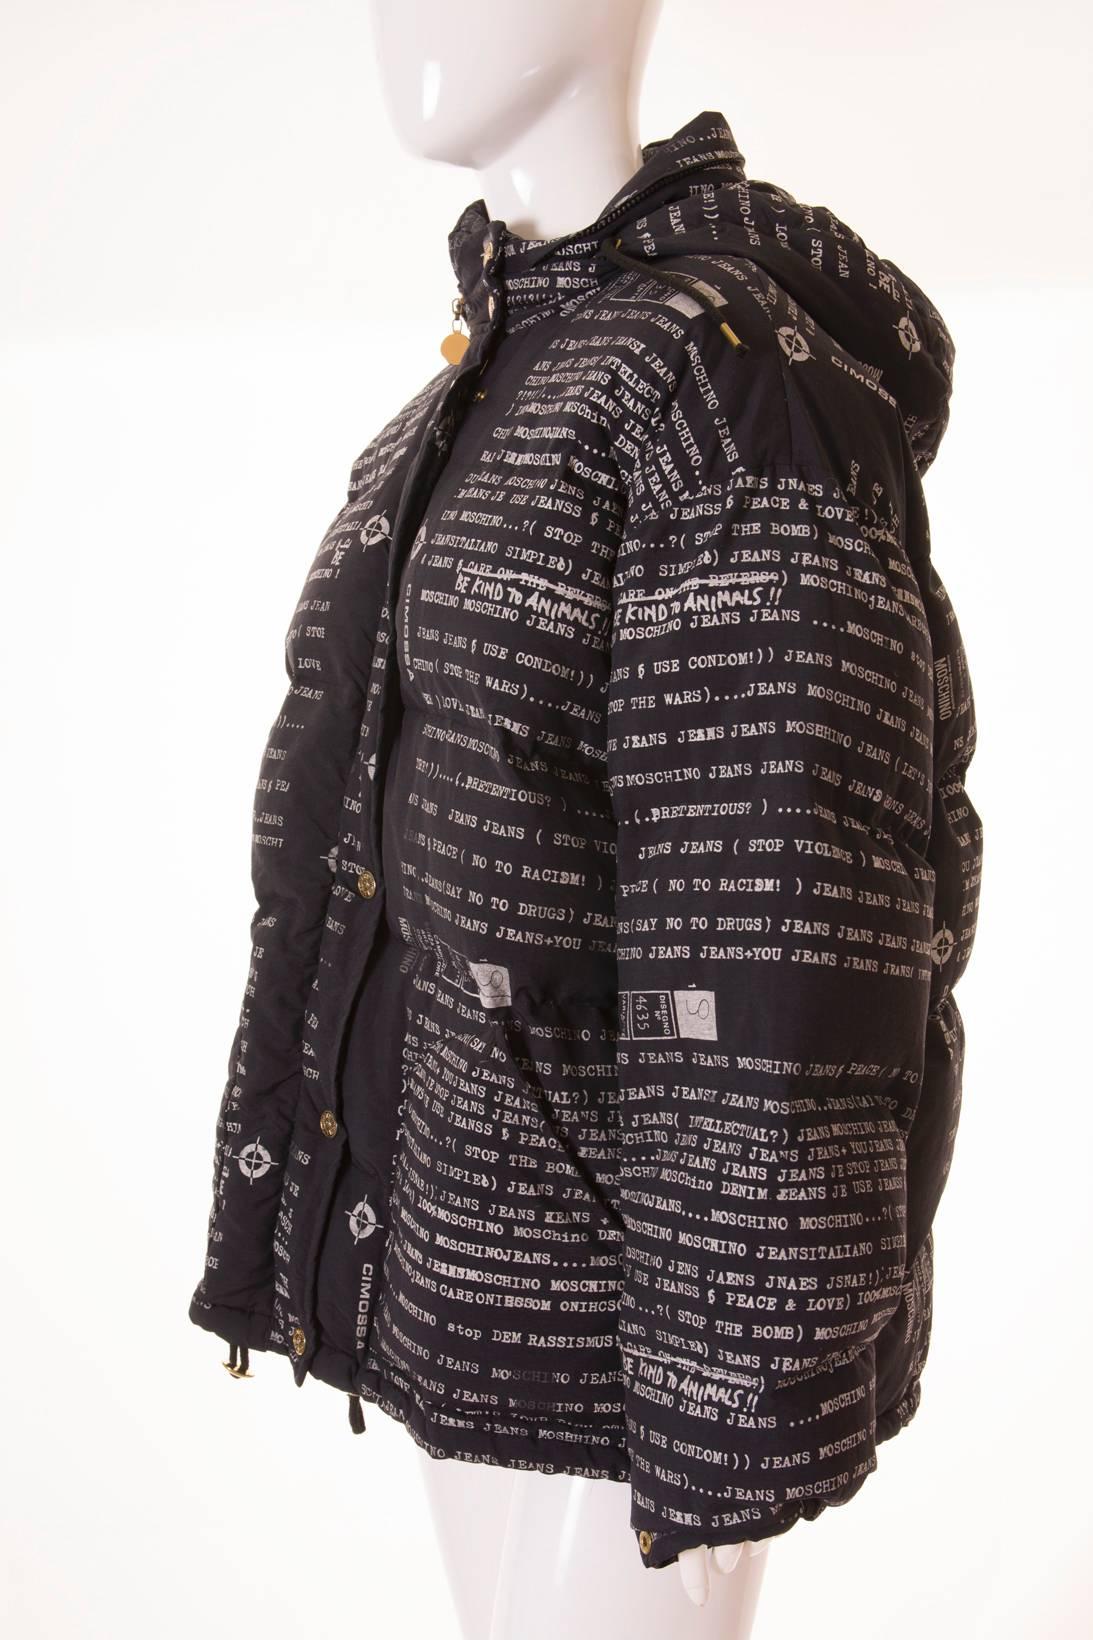 This puffer jacket by Moschino Jeans features an all over typewriter print. The text on the jacket features the word “Moschino Jeans” repeated over and over along with phrases such as “Be Kind to Animals”, “No to Racism”, “Stop Violence”, “Say No to